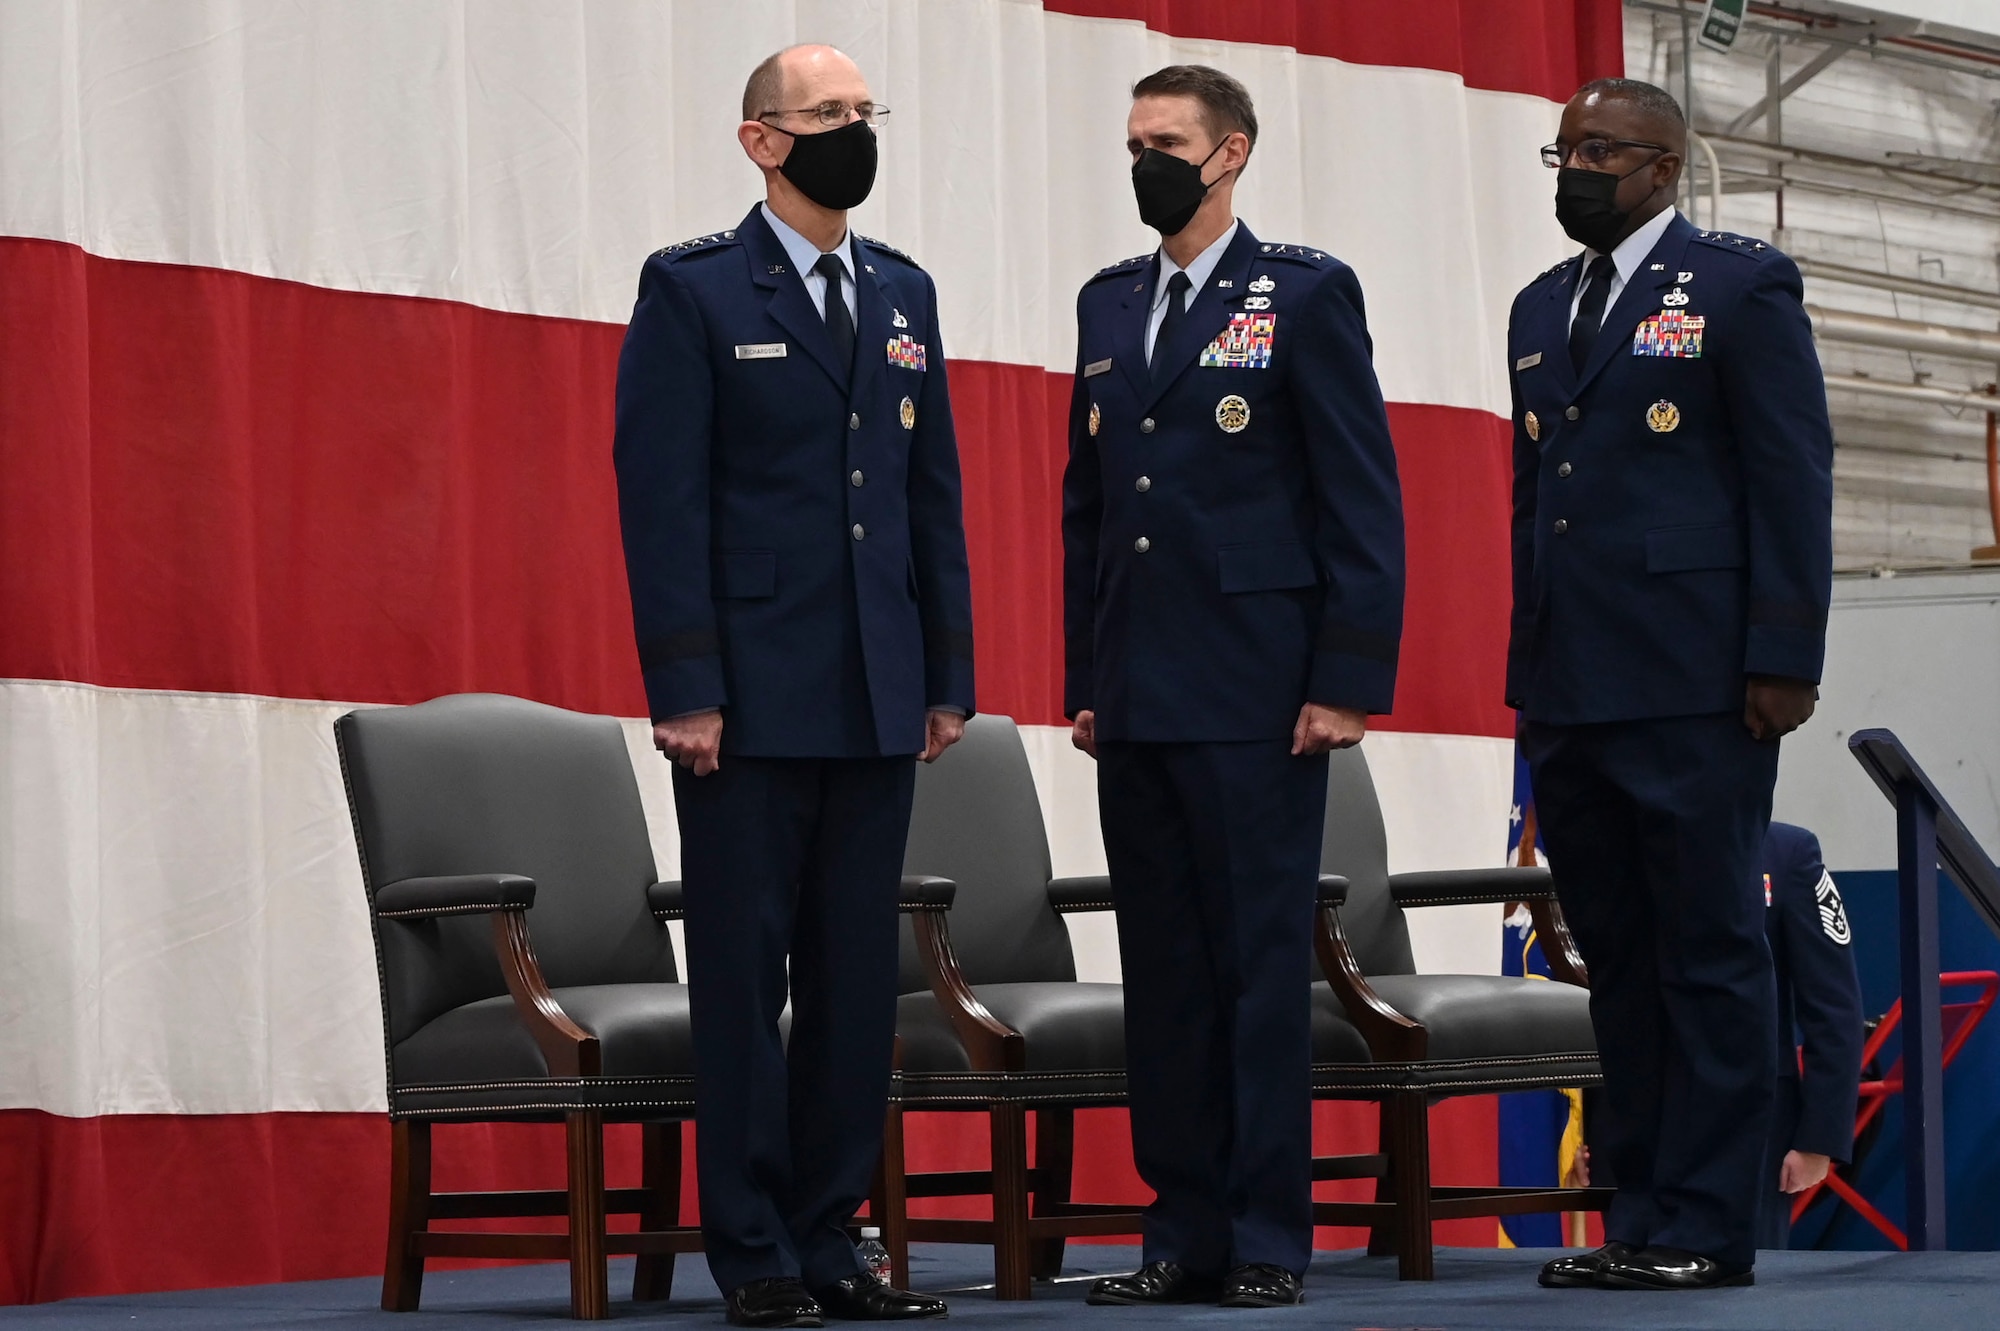 220815-F-JC105-1021
Gen. Duke Z. Richardson, commander, Air Force Materiel Command, Lt. Gen Tom D. Miller, outgoing commander, Air Force Sustainment Center, and Lt. Gen. Stacey T. Hawkins, incoming commander, Air Force Sustainment Center stand at attention as the change of command ceremony gets underway at Tinker Air Force Base, Oklahoma, Aug. 15, 2022